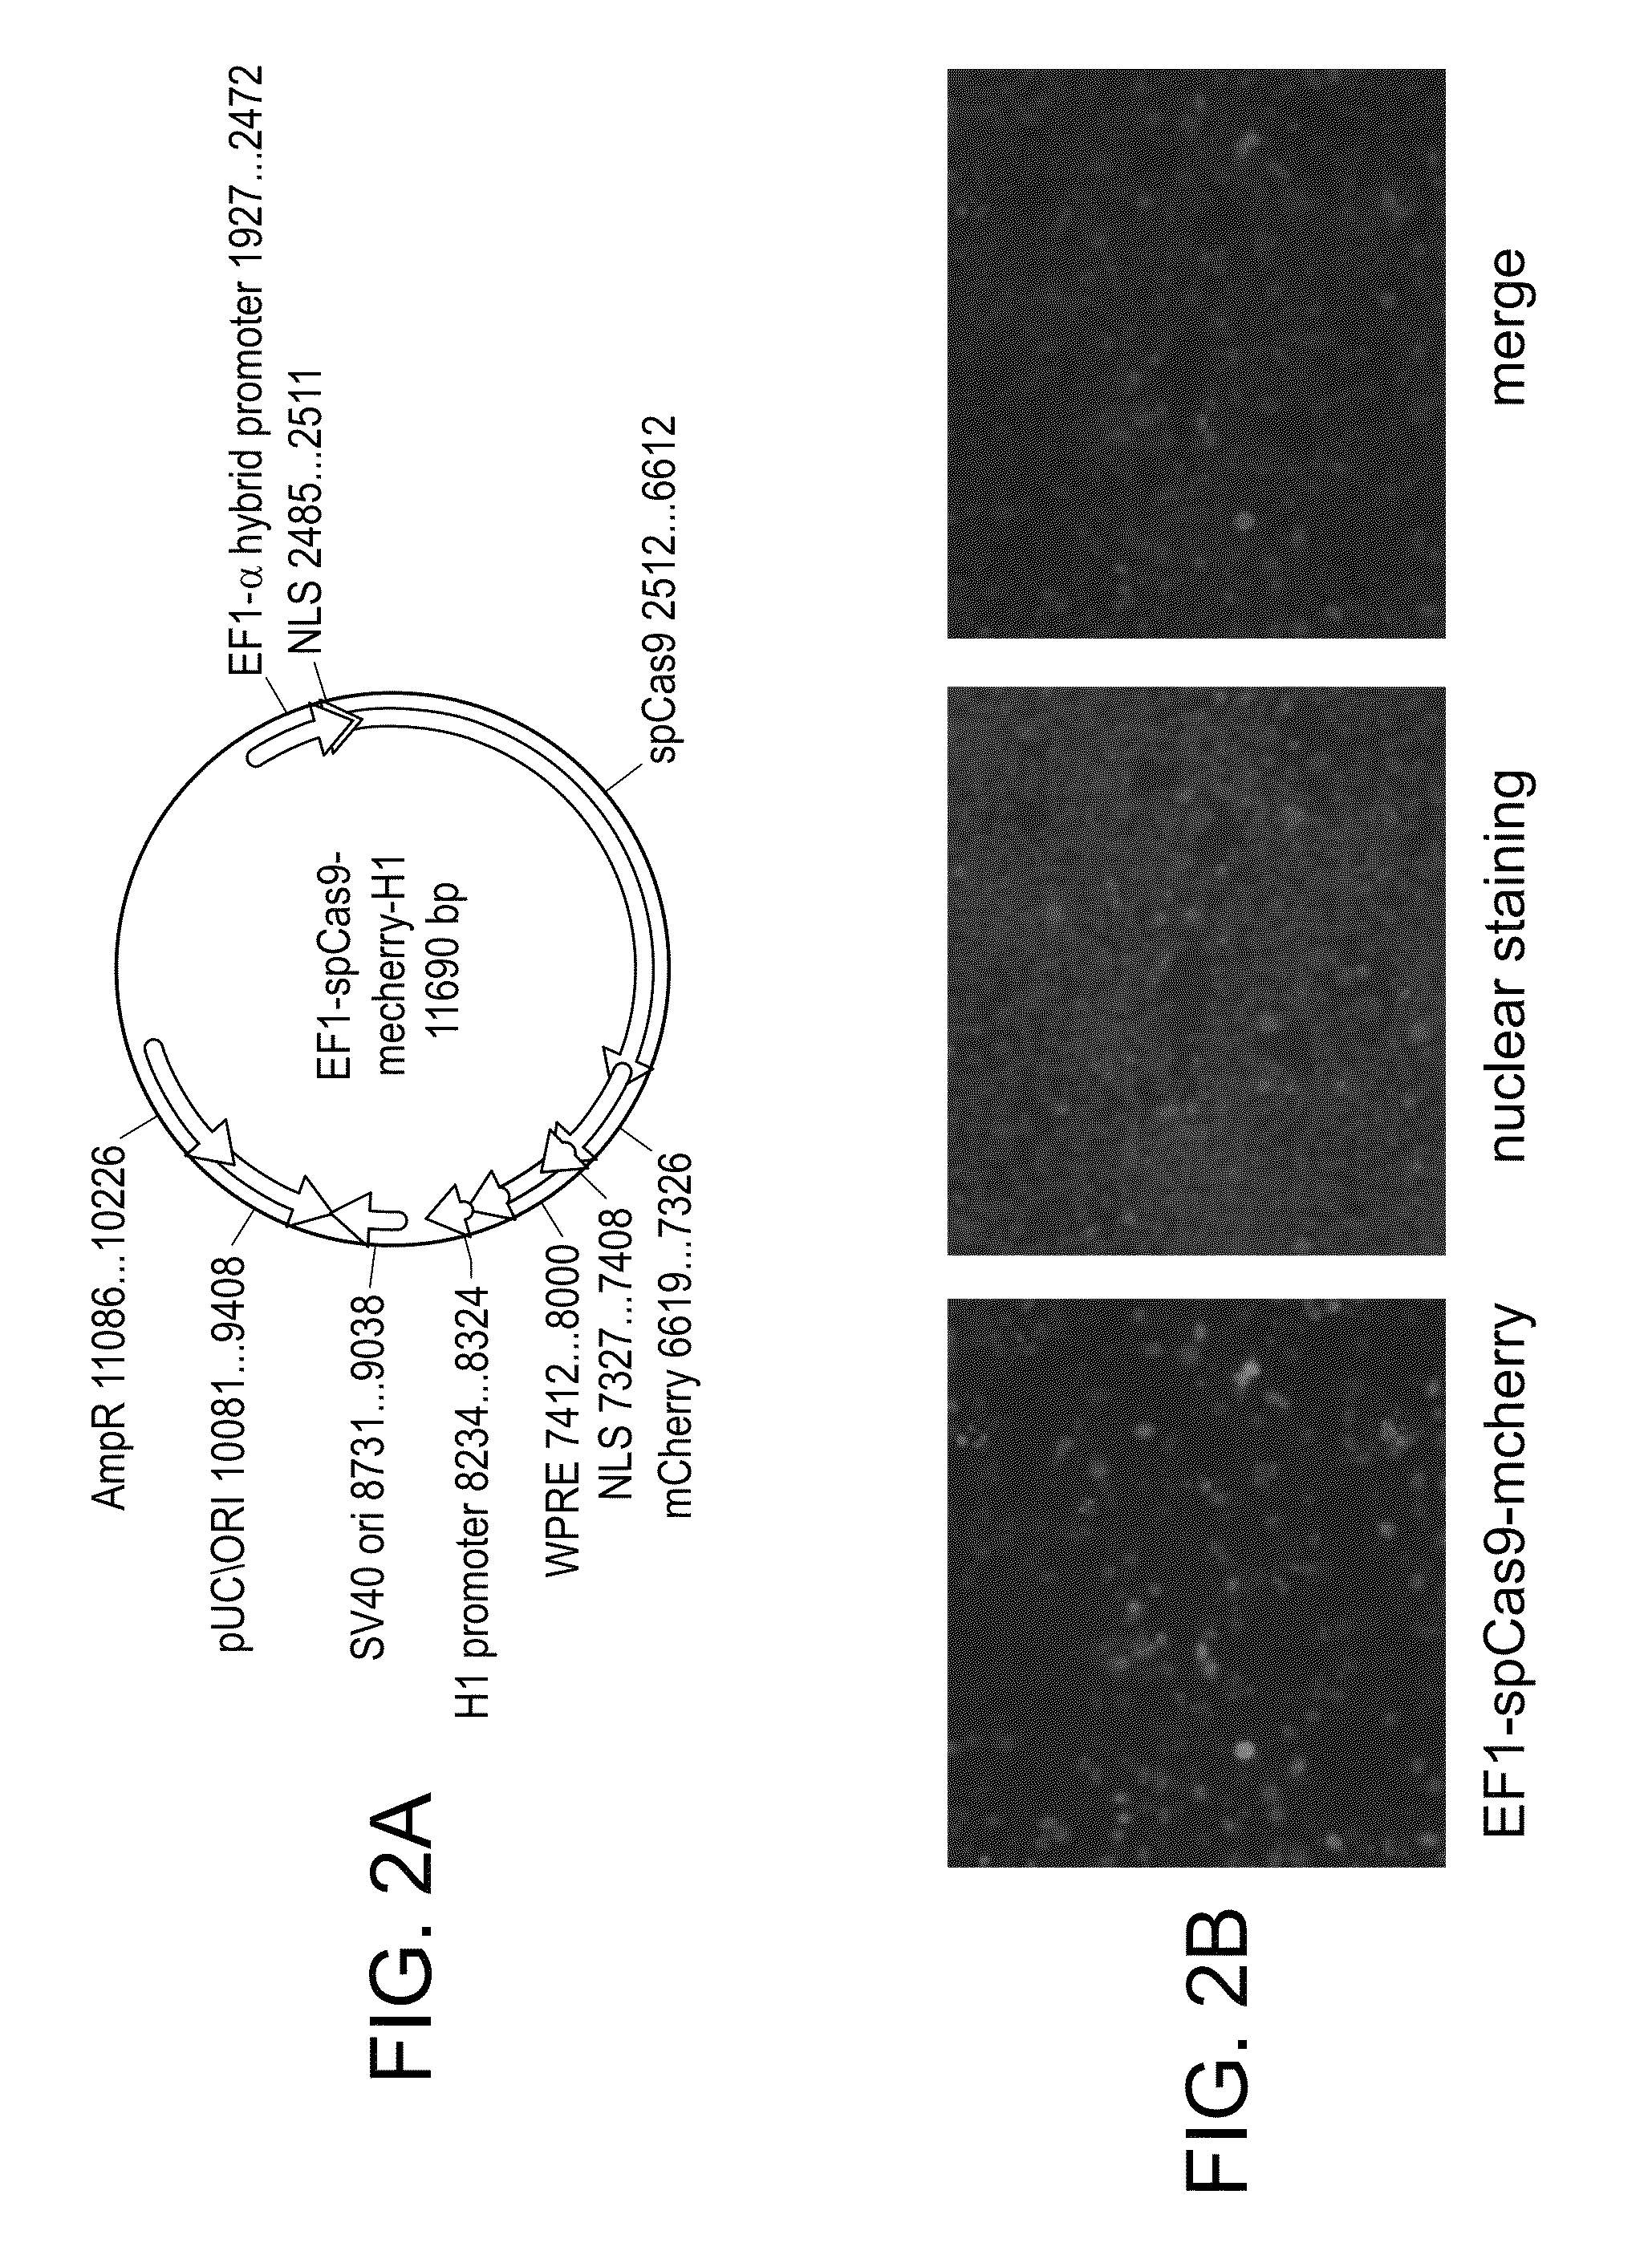 Compositions and methods directed to CRISPR/Cas genomic engineering systems